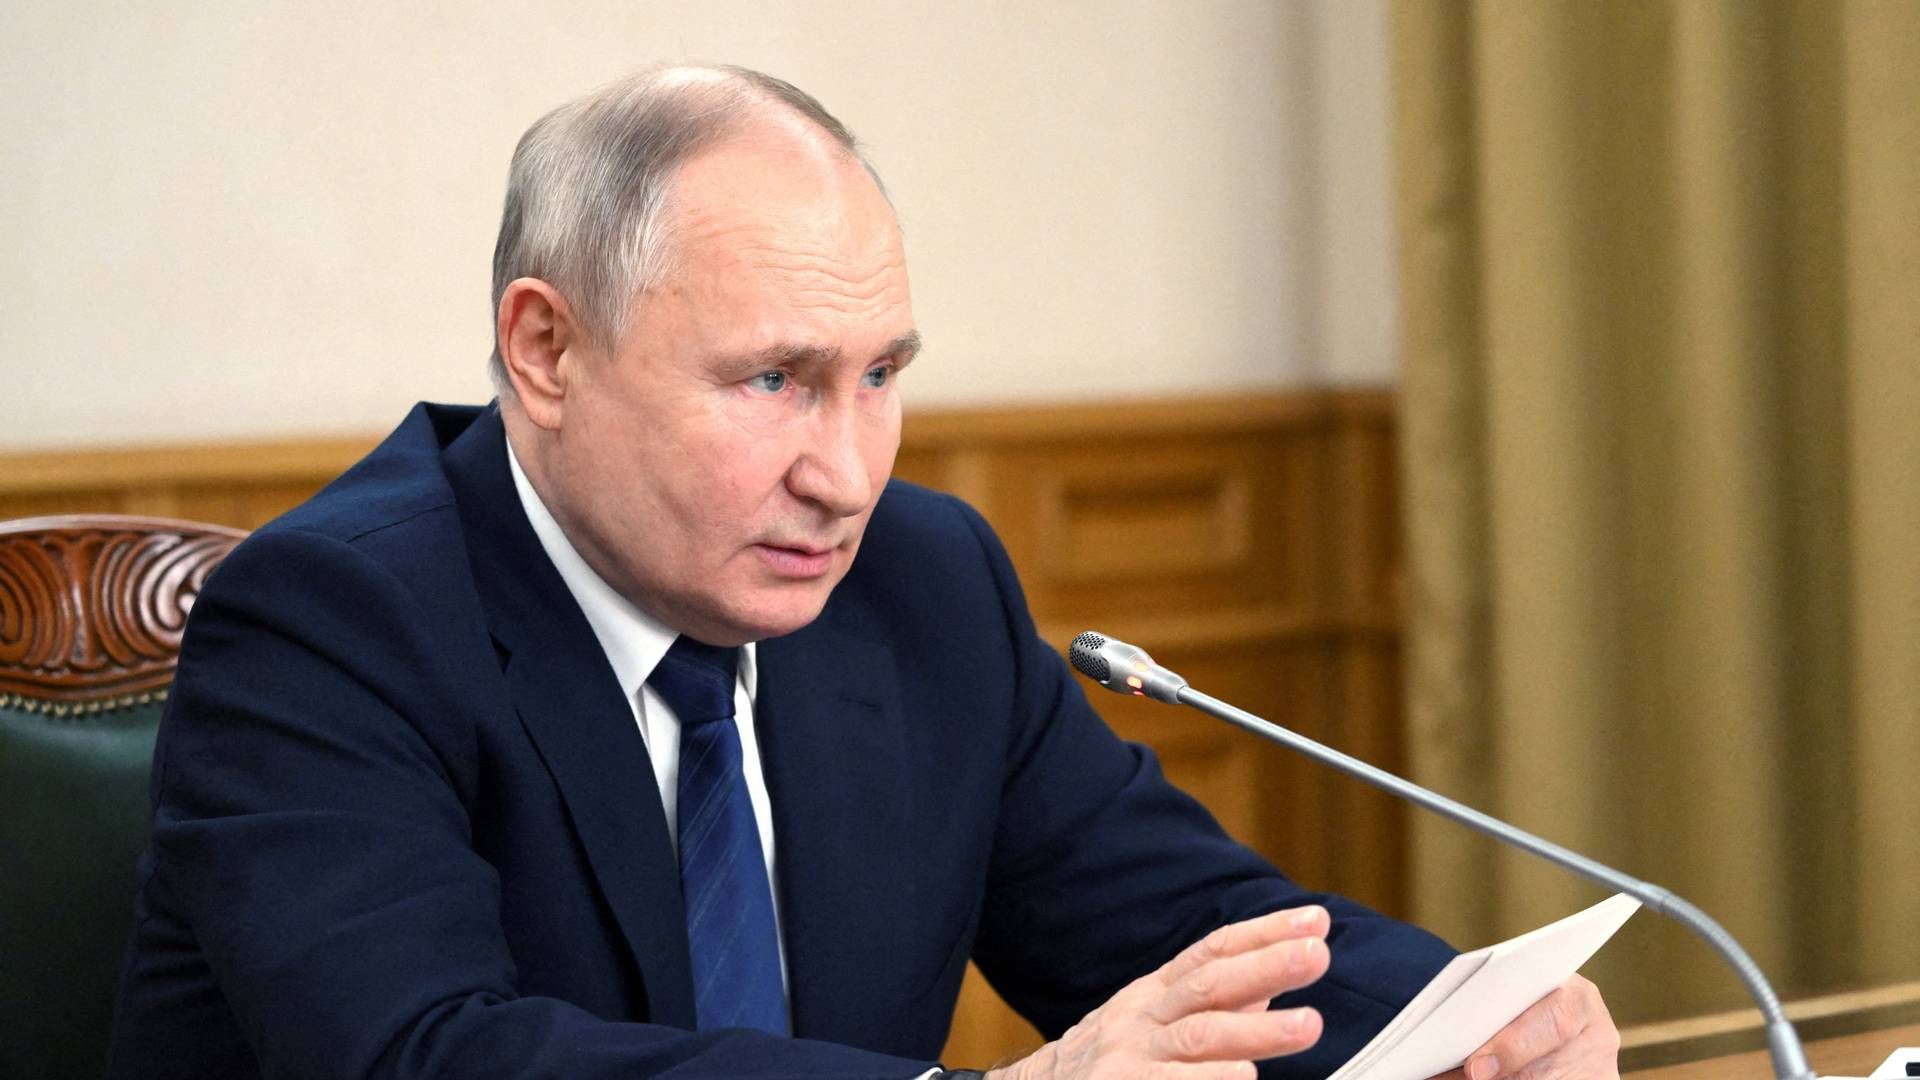 Rissian President Vladimir Putin has stated numerous times that Russia was, is and will continue to be open for negotiations on Ukraine, a Kremlin spokesman has told Bloomberg News. | Photo: Sputnik/Reuters/Ritzau Scanpix